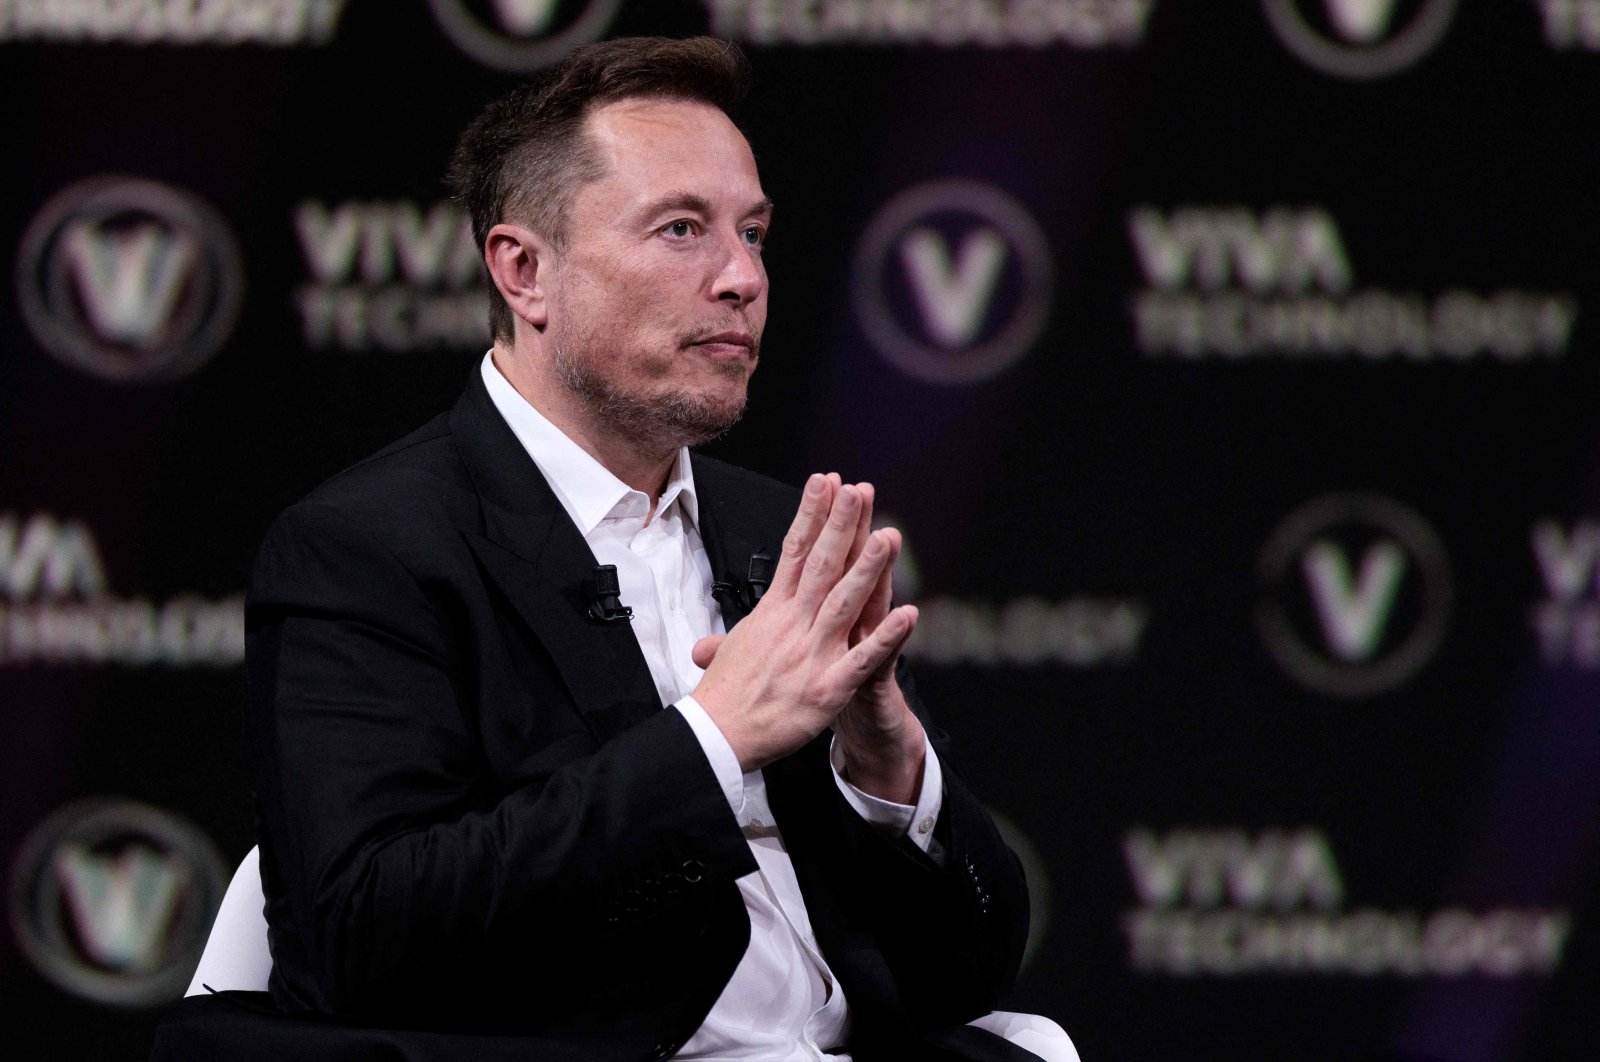 SpaceX, Twitter and electric car maker Tesla CEO Elon Musk attends an event during the Vivatech technology startups and innovation fair at the Porte de Versailles exhibition center in Paris, on June 16, 2023. (AFP File Photo)